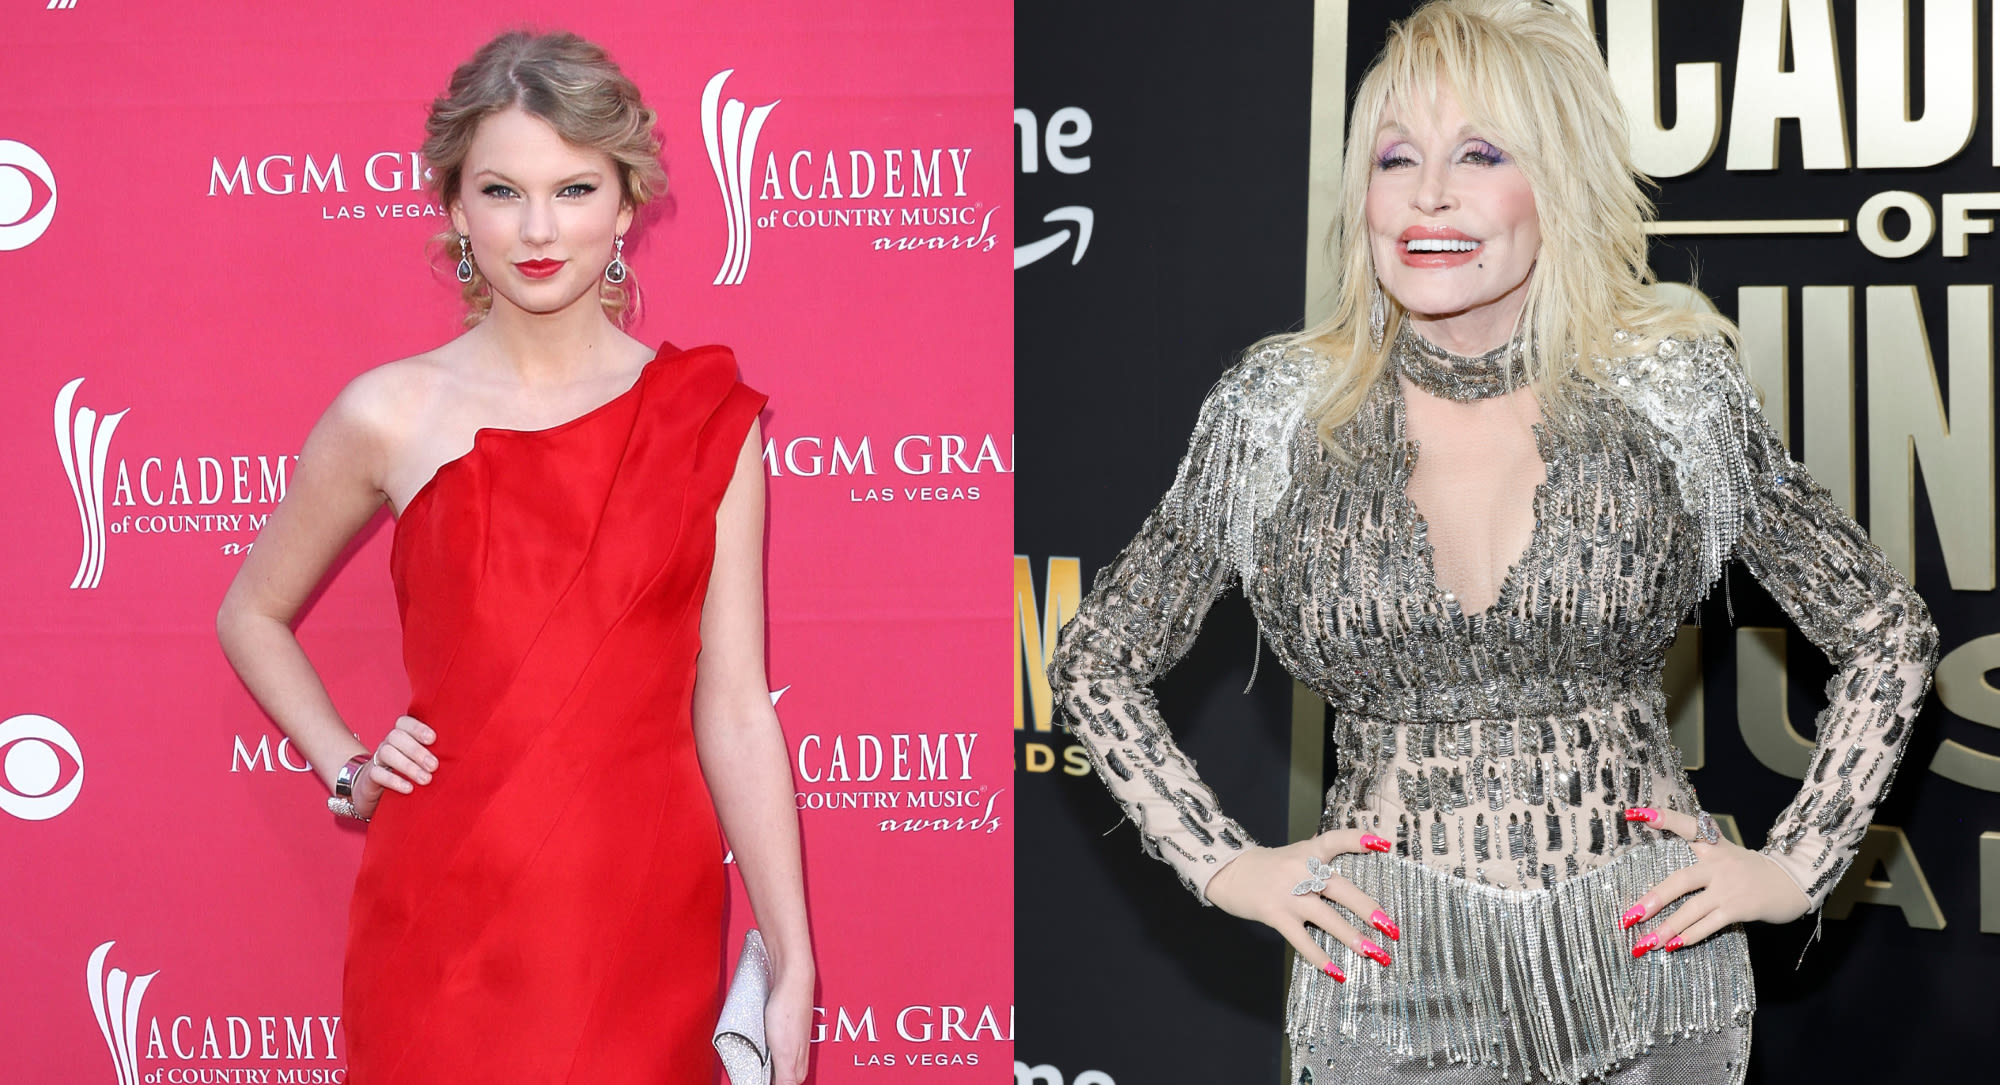 The Best Dressed Stars in ACM Awards History: 59 Years of Country Music’s Biggest Fashion Moments on the Red Carpet